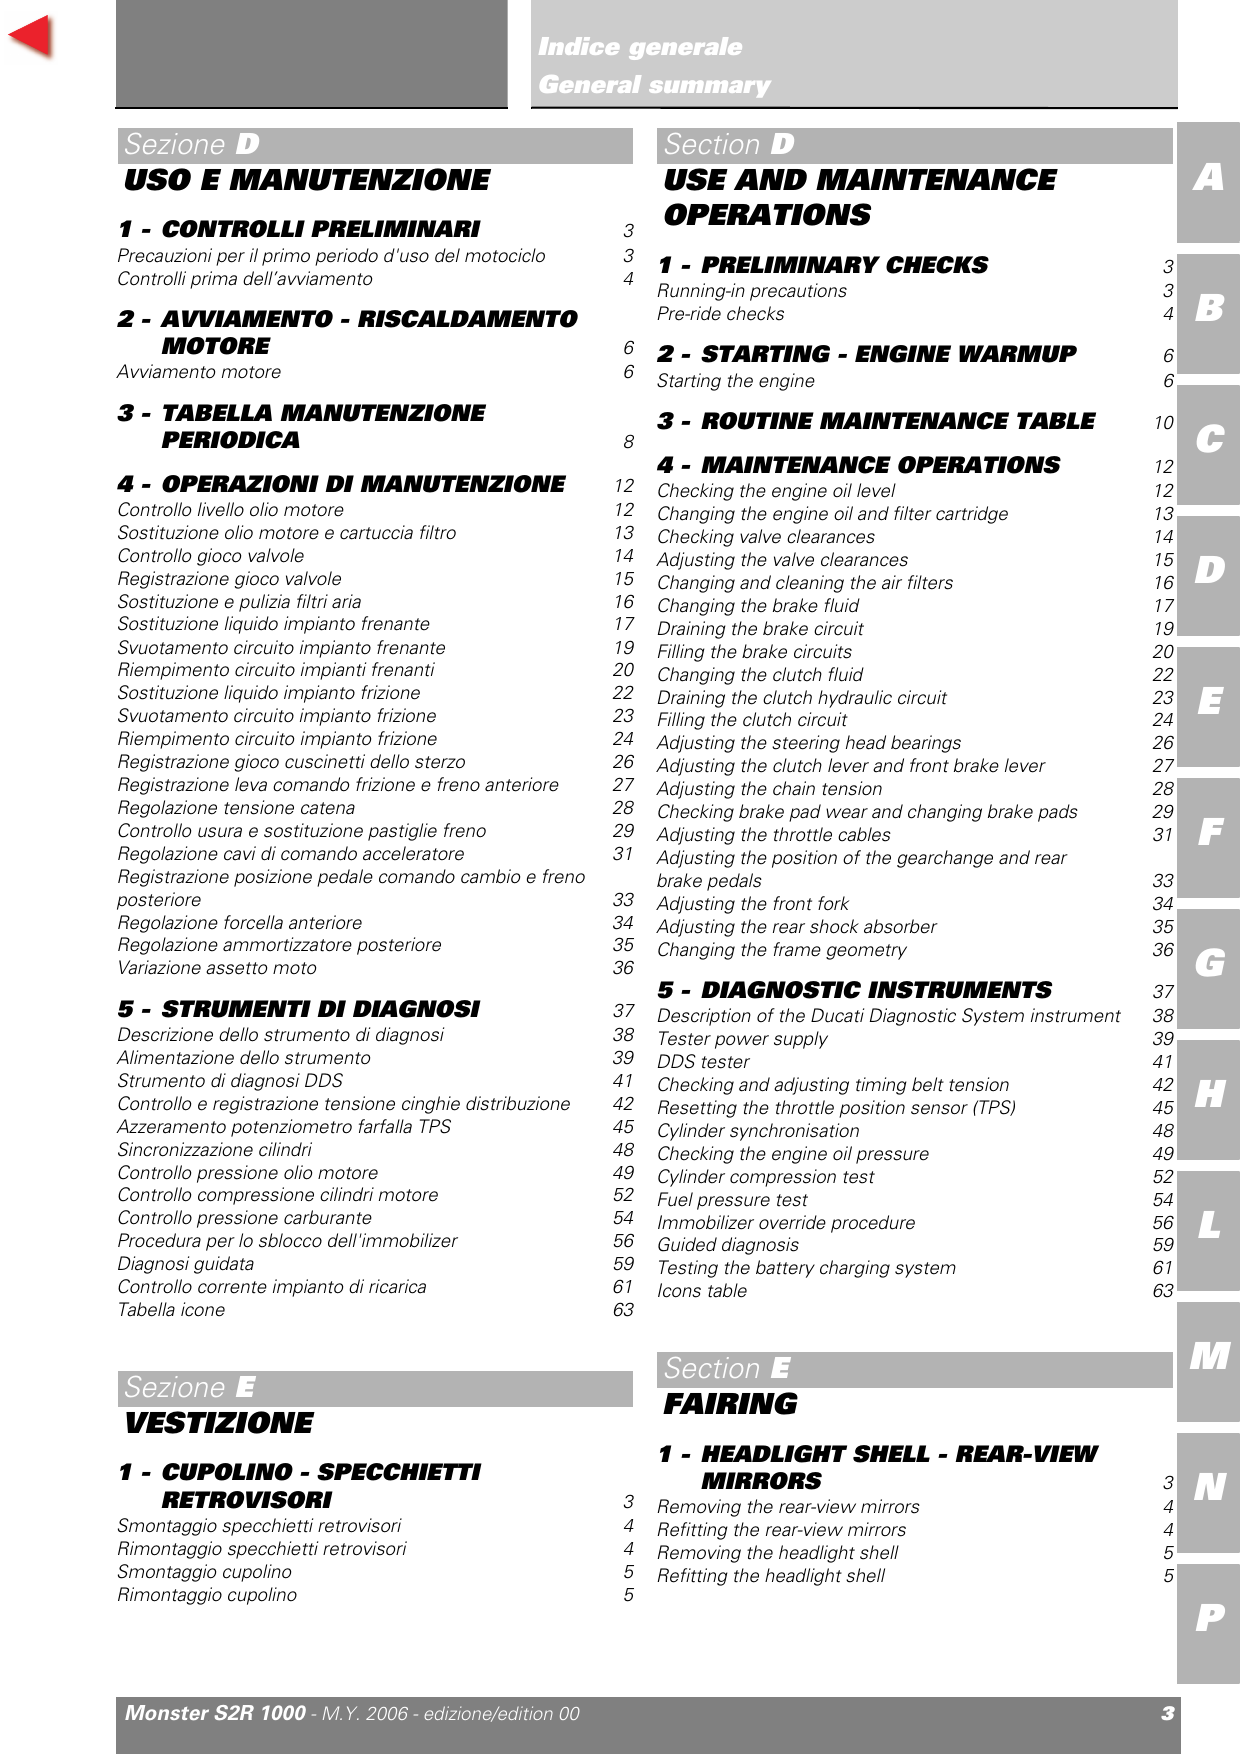 2006-2008 Ducati Monster S2R 1000 service manual Preview image 4